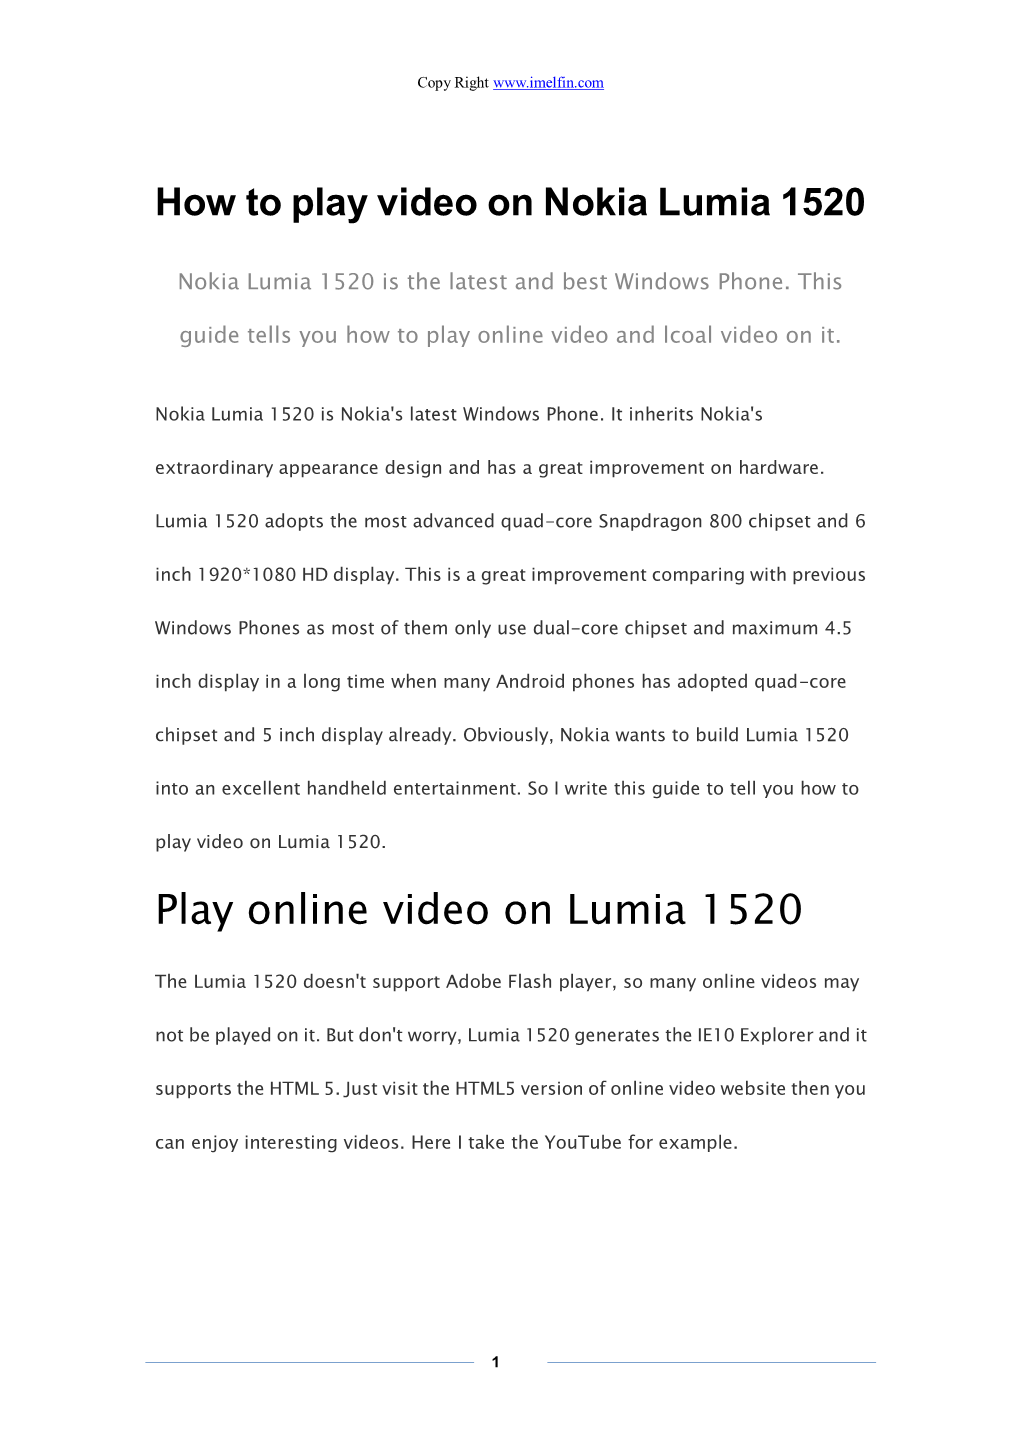 Play Online Video on Lumia 1520